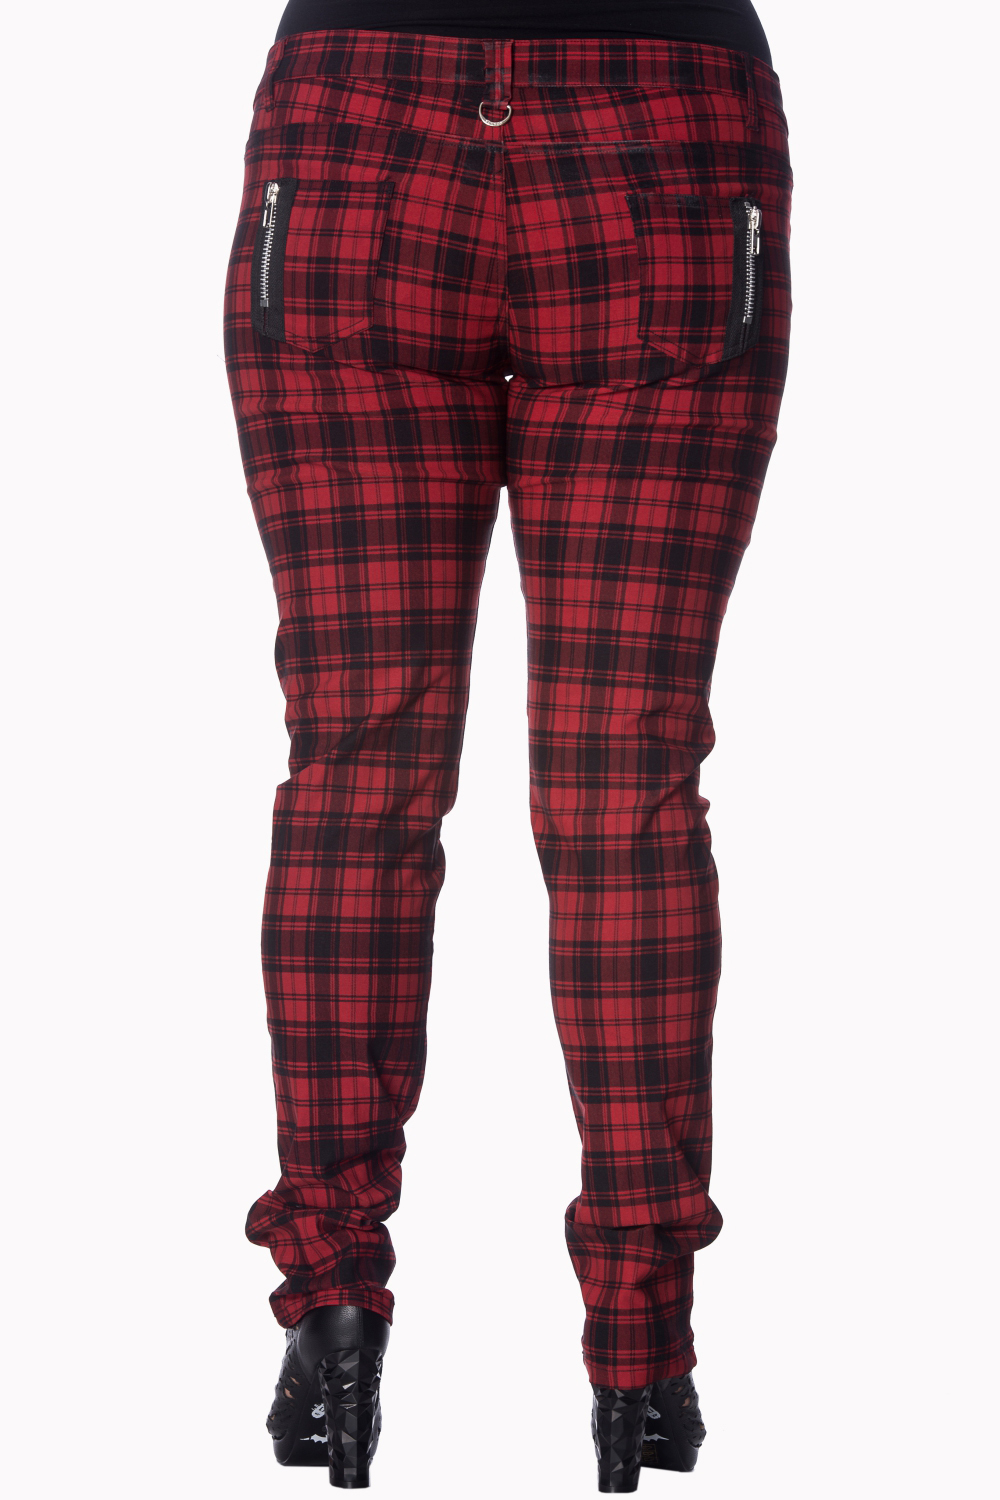 Plus Size Red Checked Skinny Jeans by Banned Apparel